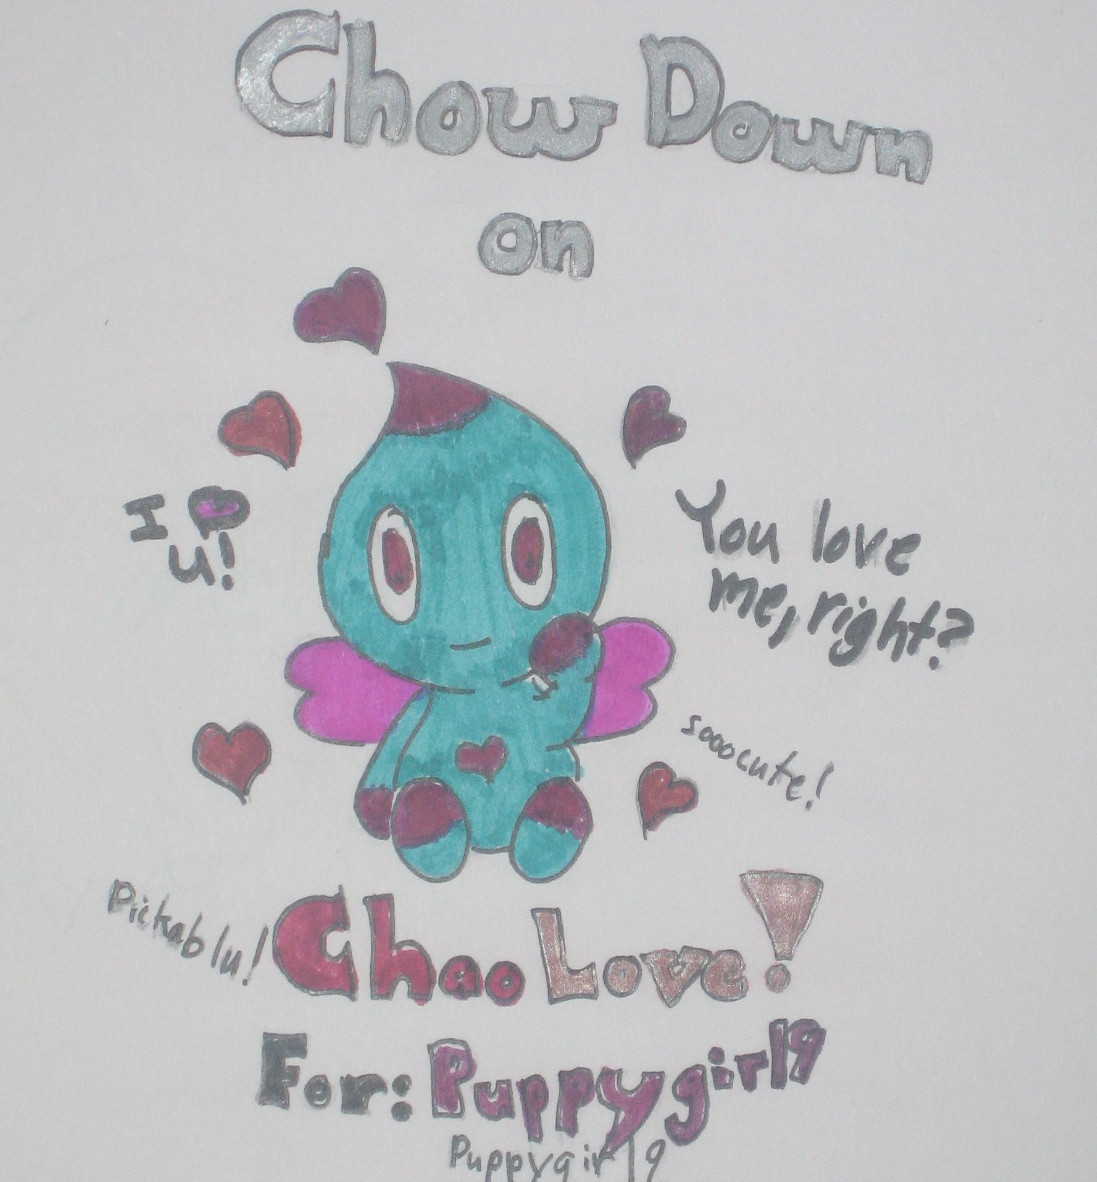 For Puppygirl9-Chow down on Chao love! by PickaBlu